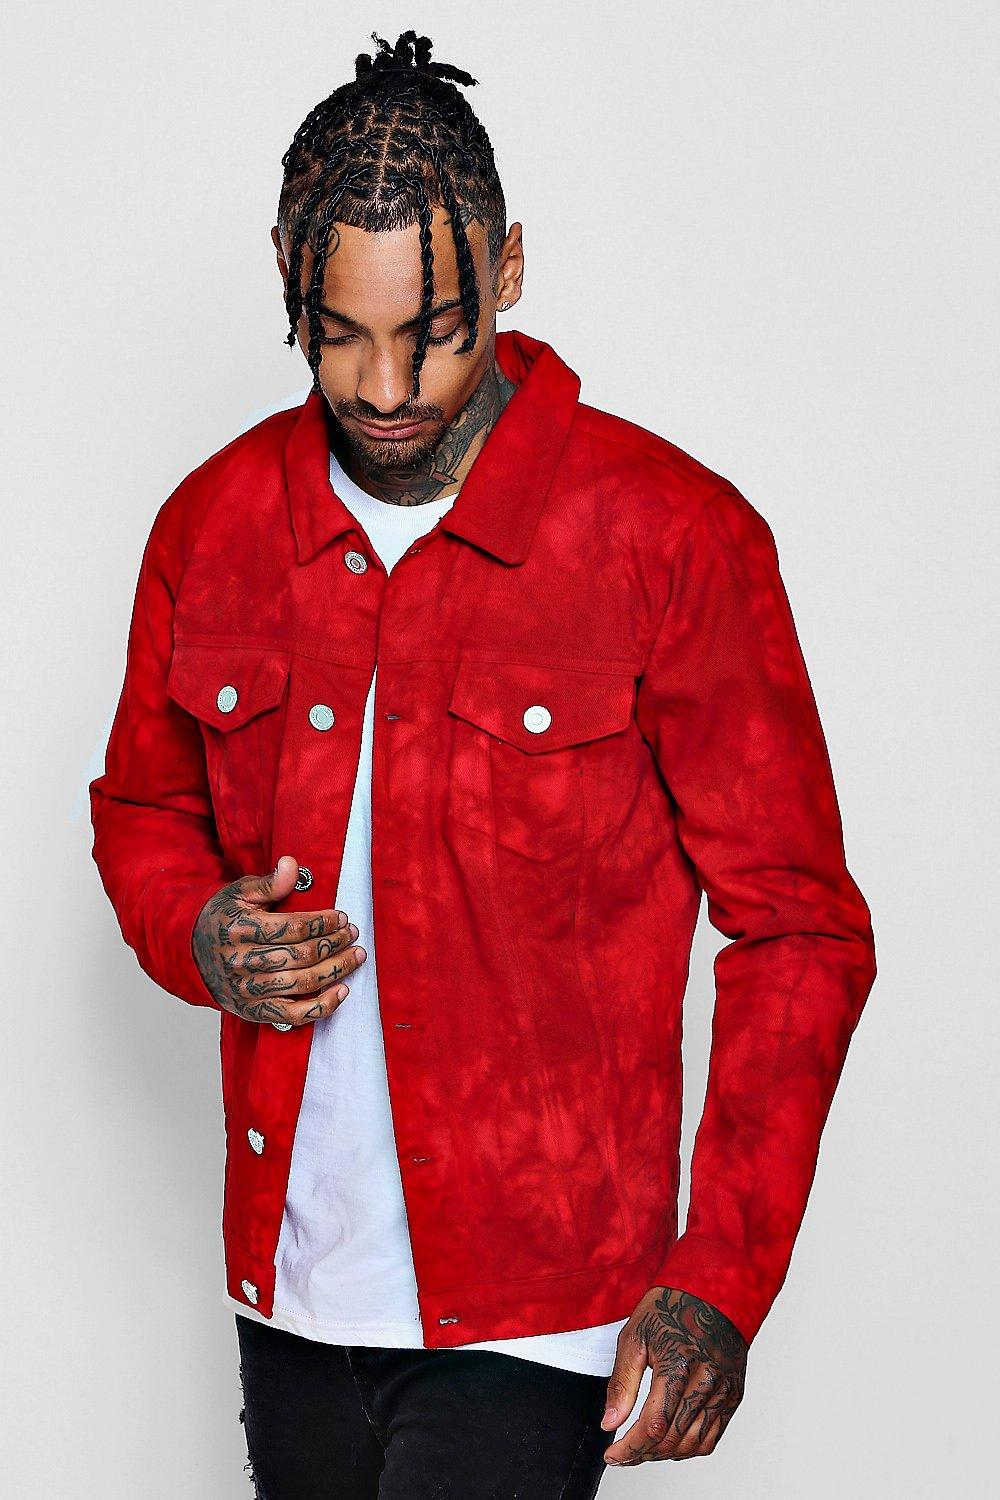 all red jean jacket